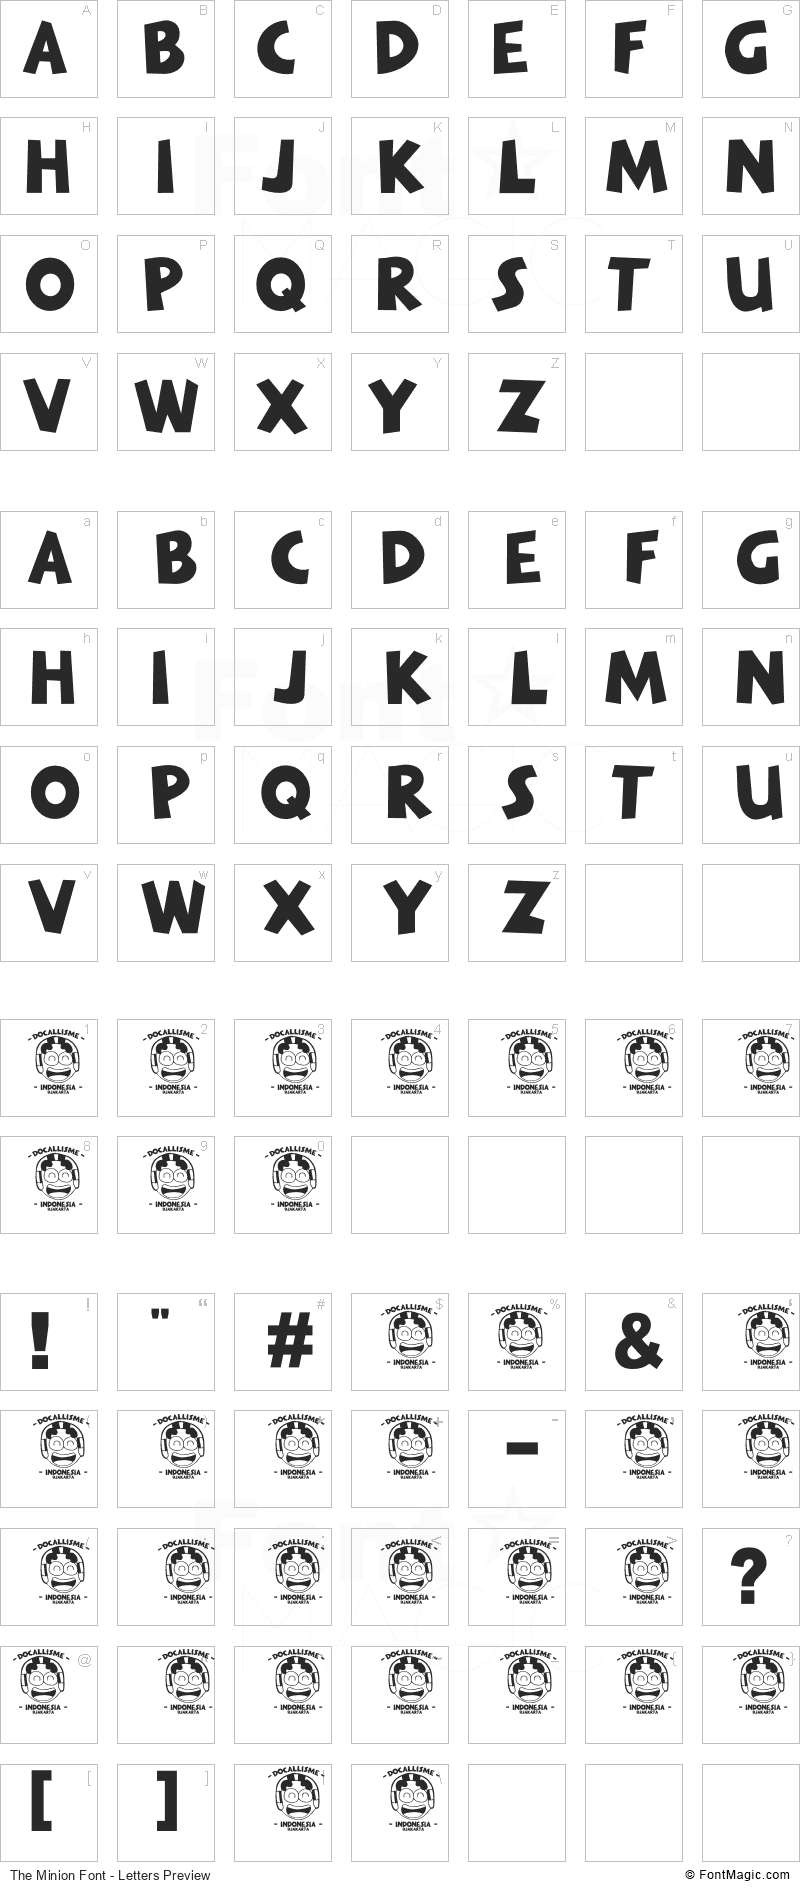 The Minion Font - All Latters Preview Chart